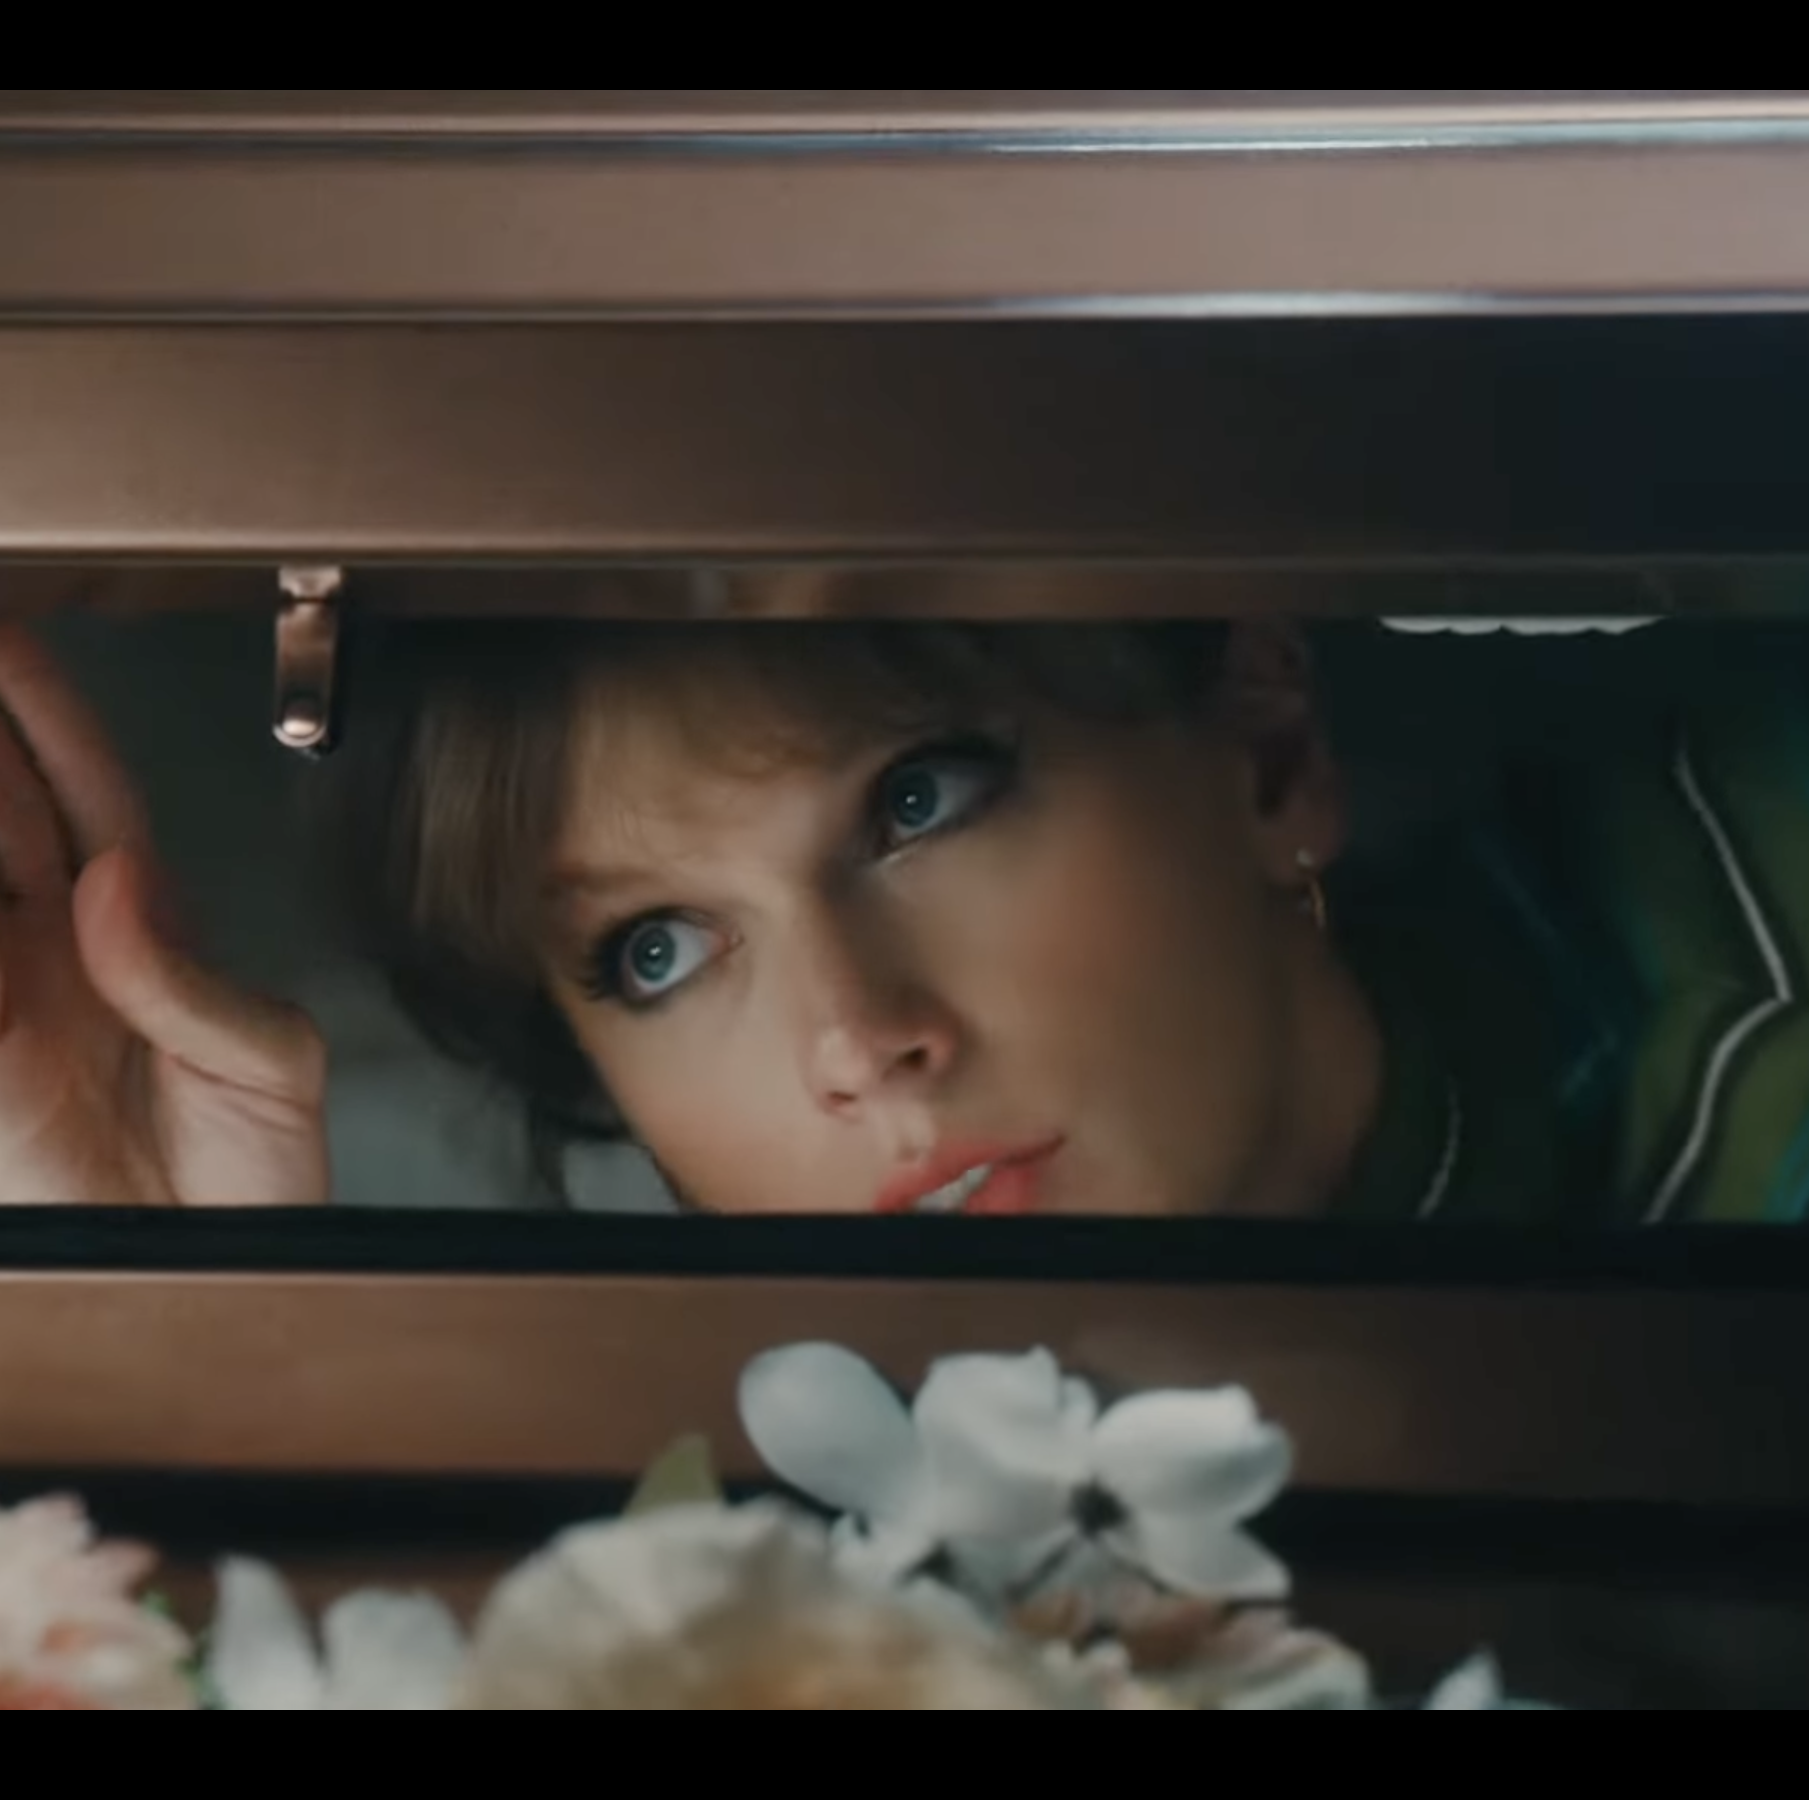 Taylor Swift Trolls Her Future Children in Music Video for 